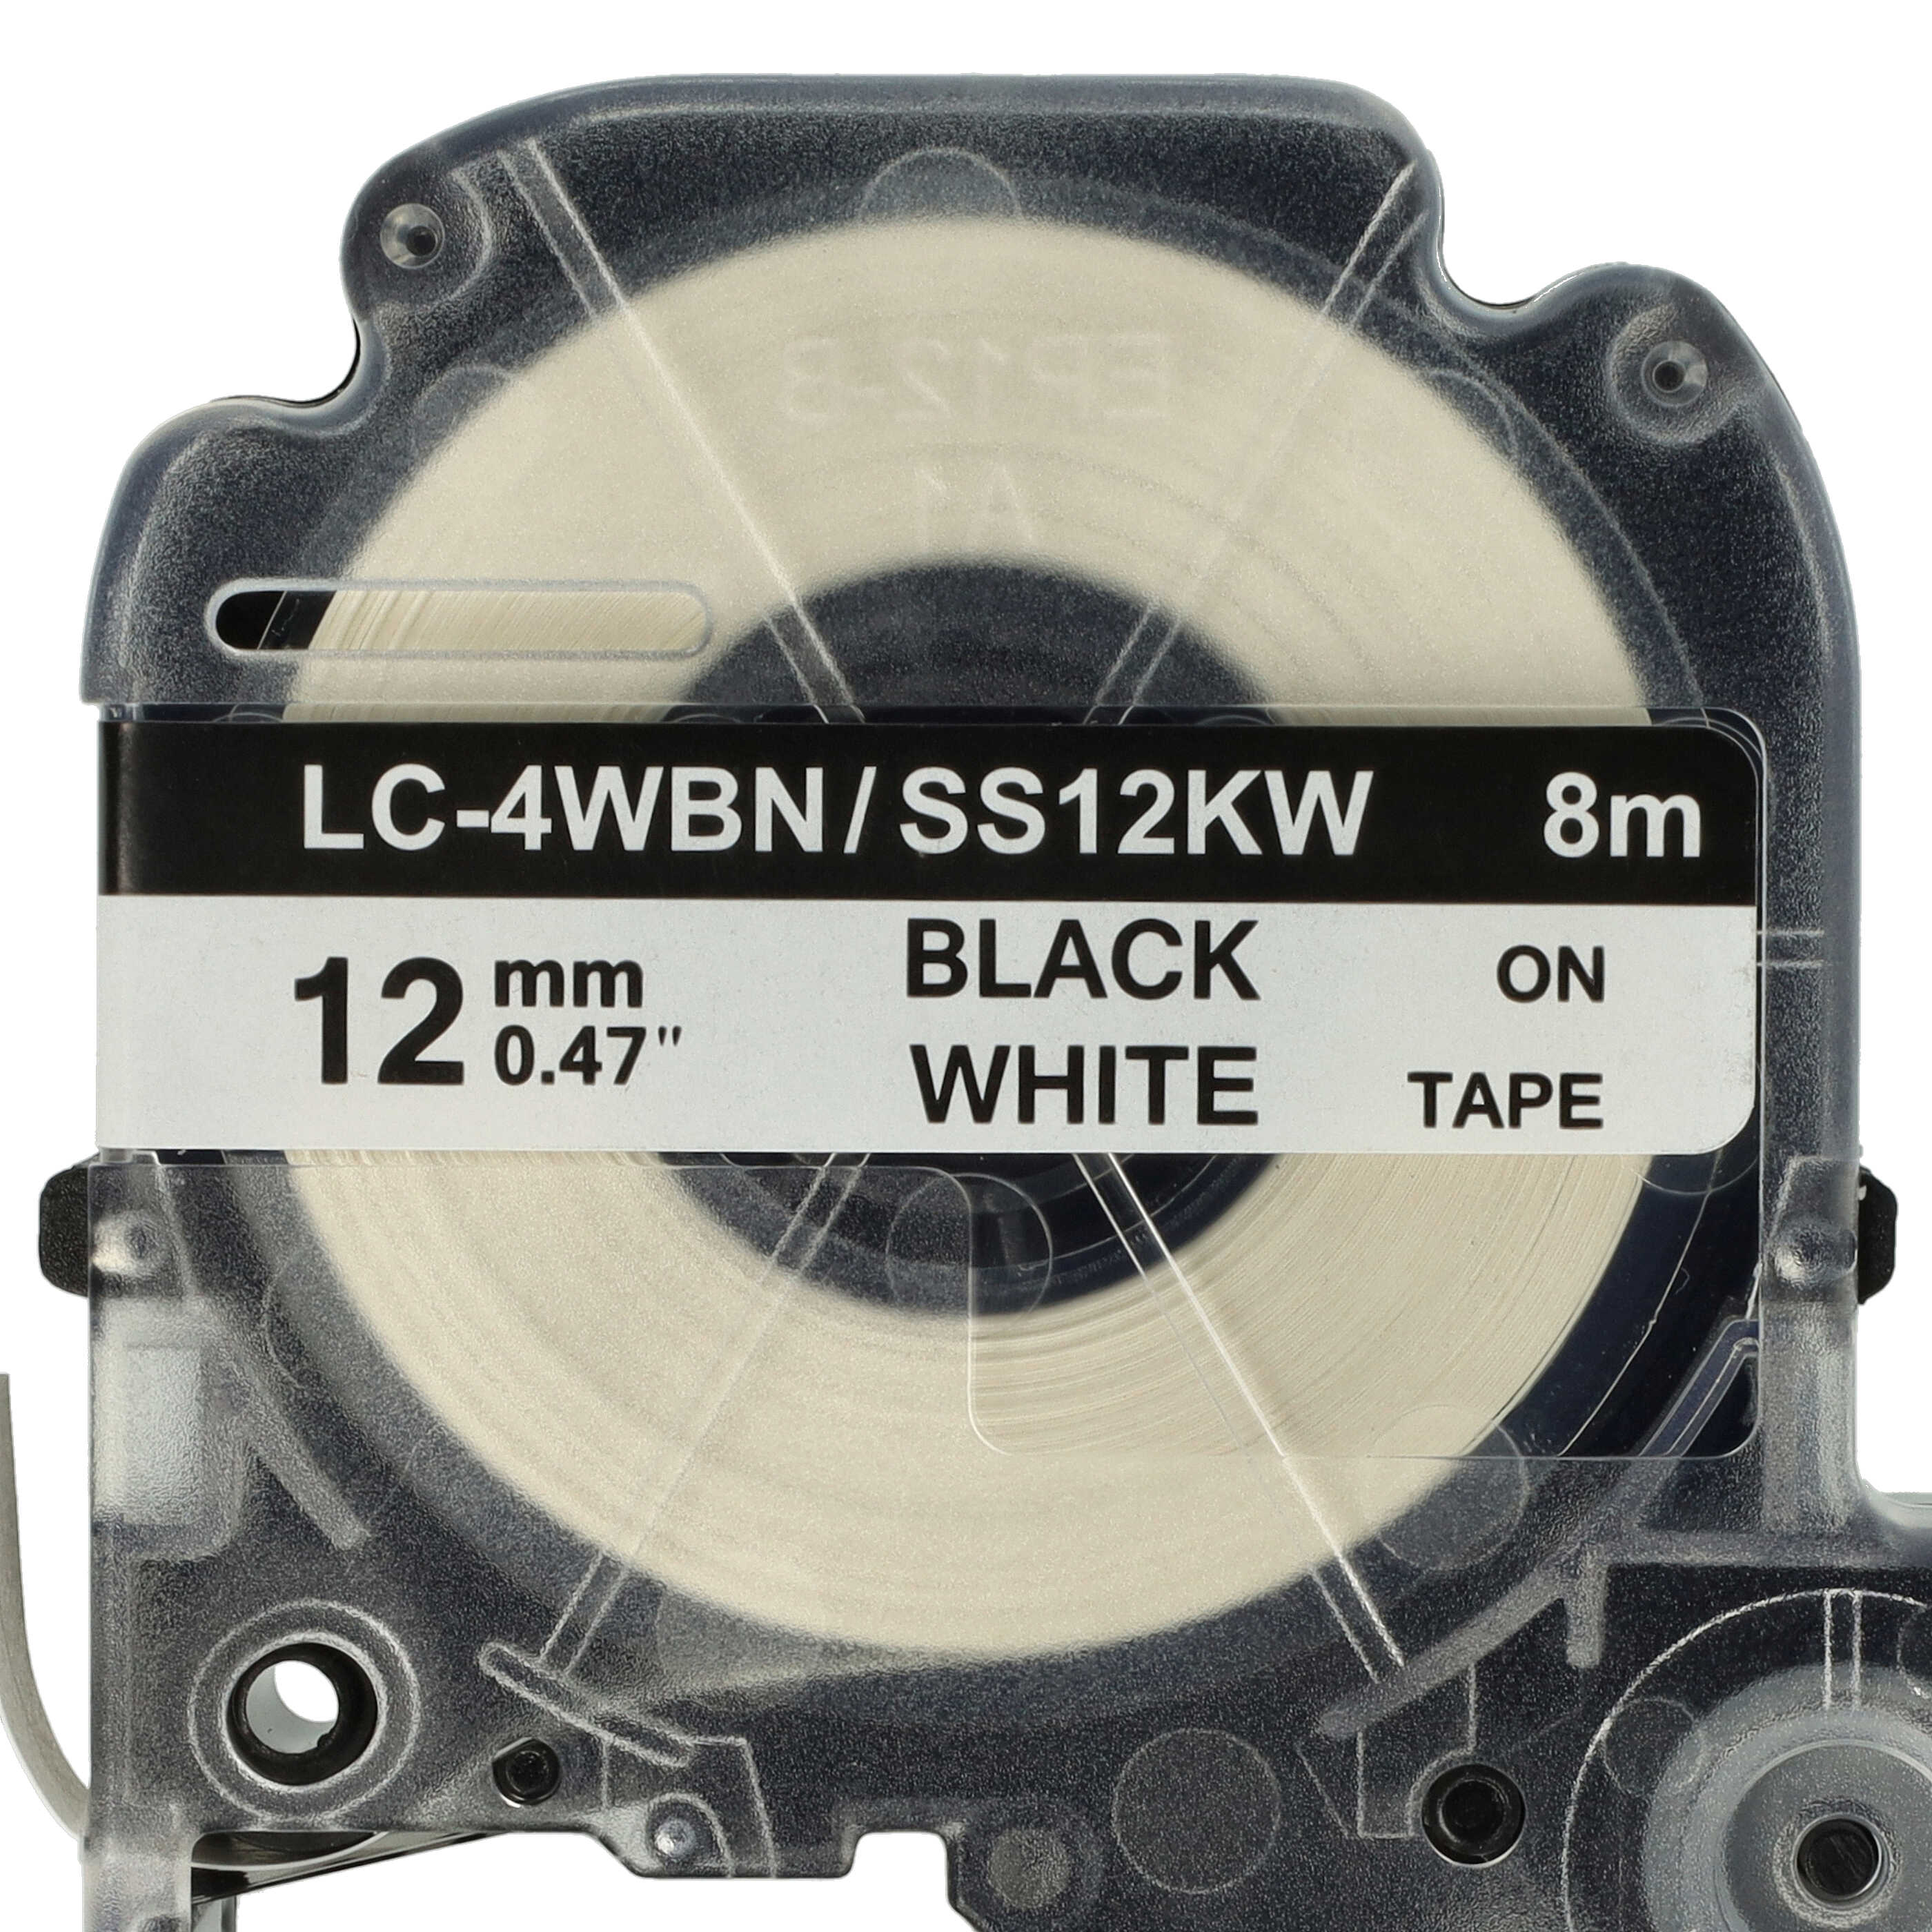 3x Label Tape as Replacement for Epson SS12KW, LC-4WBN - 12 mm Black to White